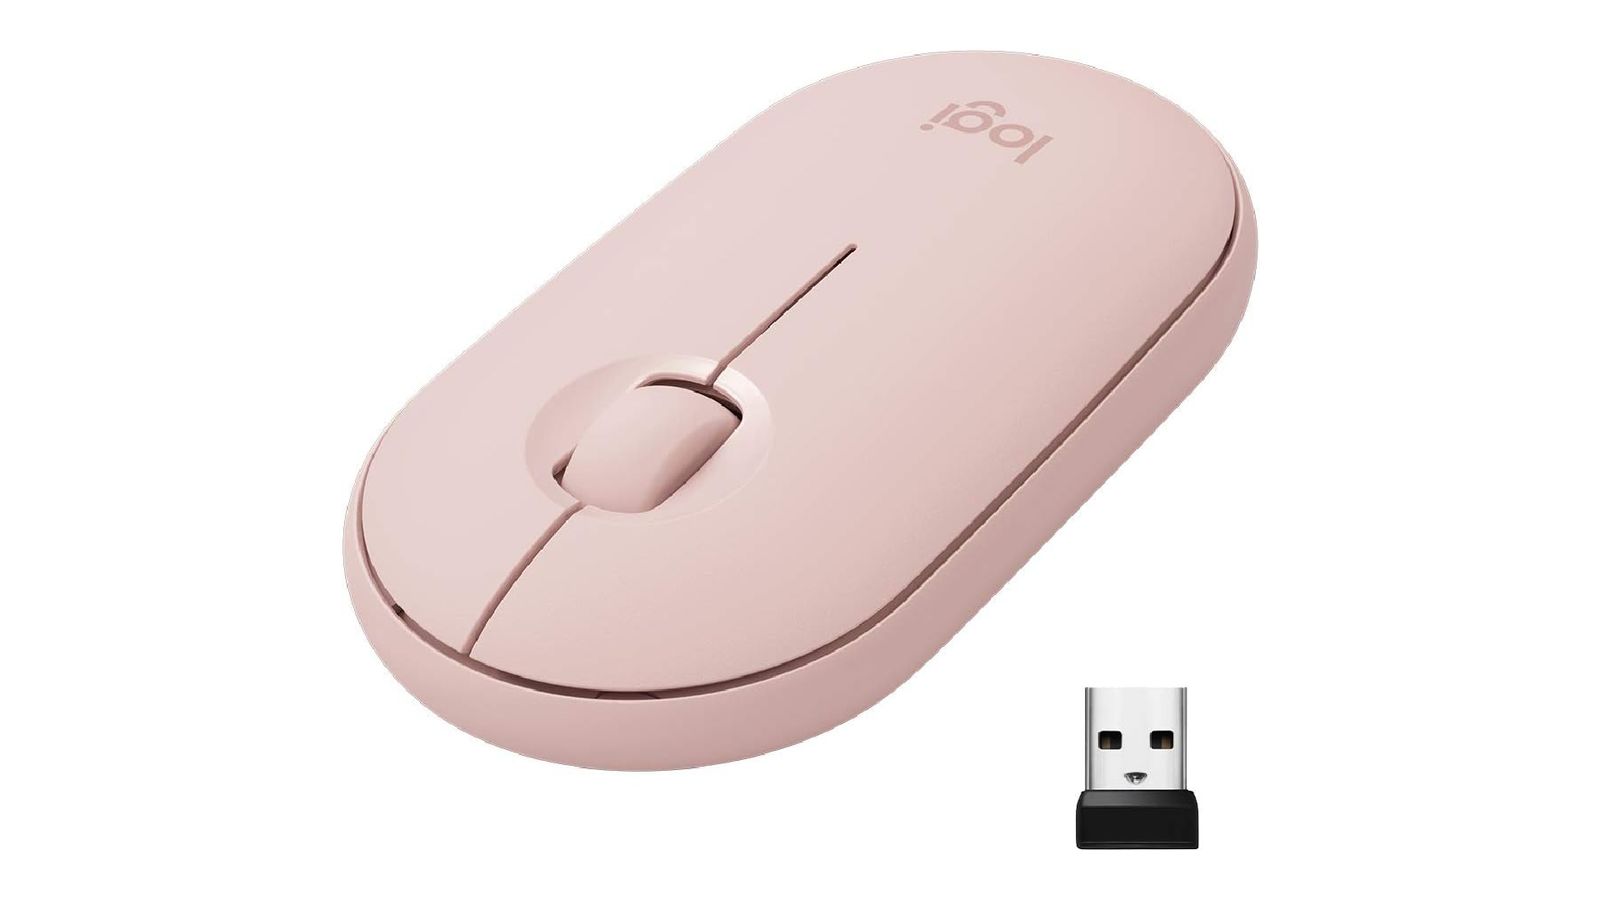 Logitech Pebble product image of a small pink wireless mouse next to a USB stick.